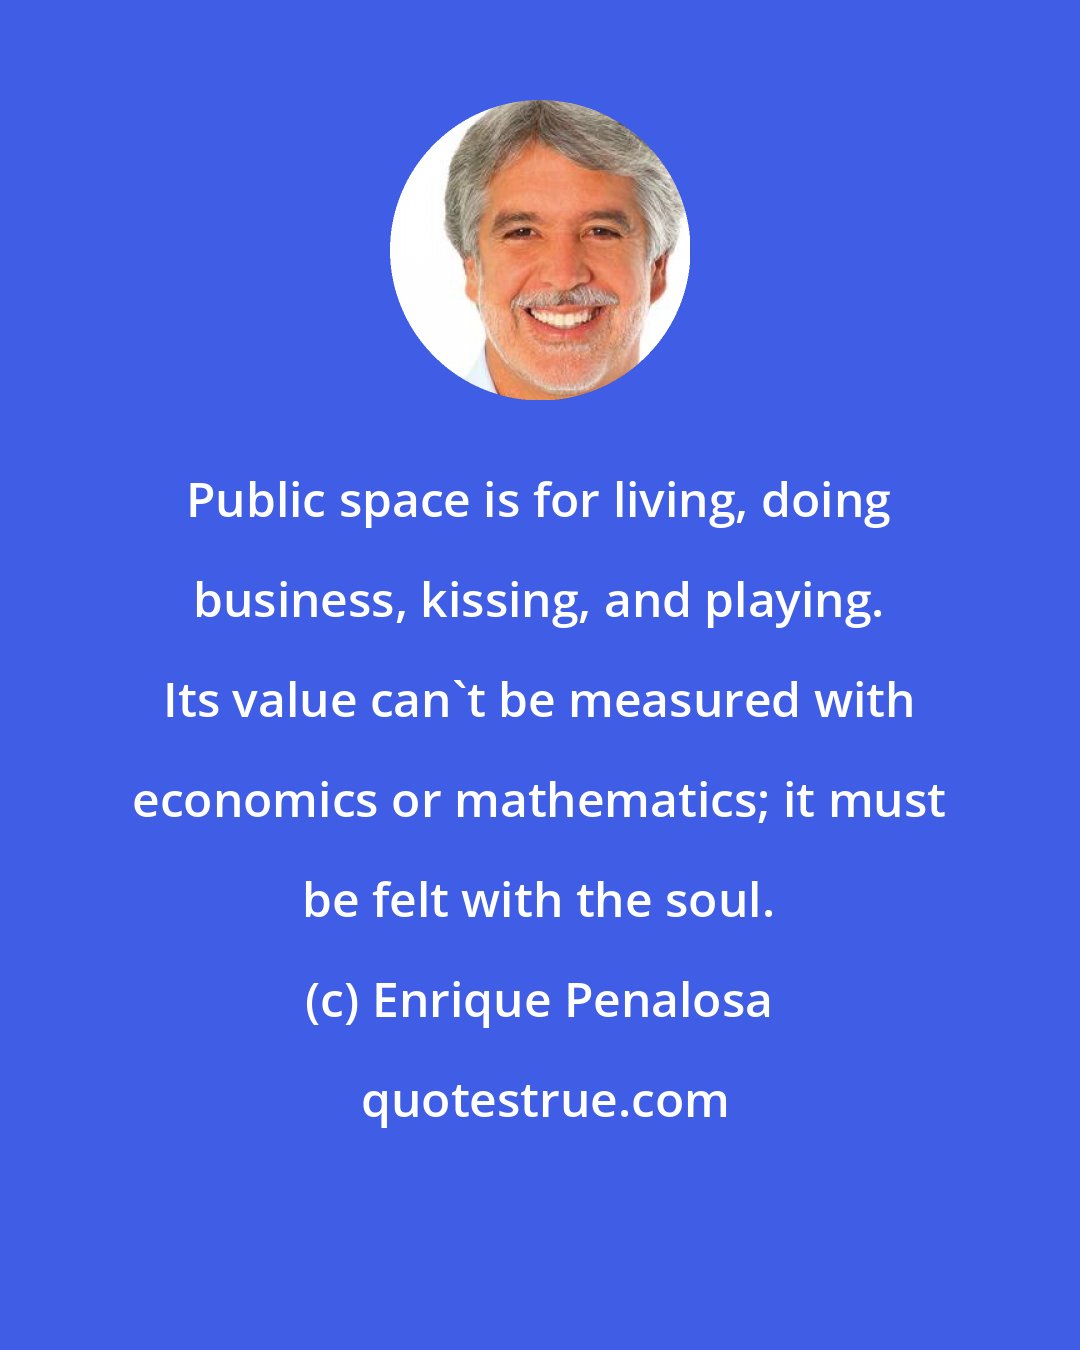 Enrique Penalosa: Public space is for living, doing business, kissing, and playing. Its value can't be measured with economics or mathematics; it must be felt with the soul.